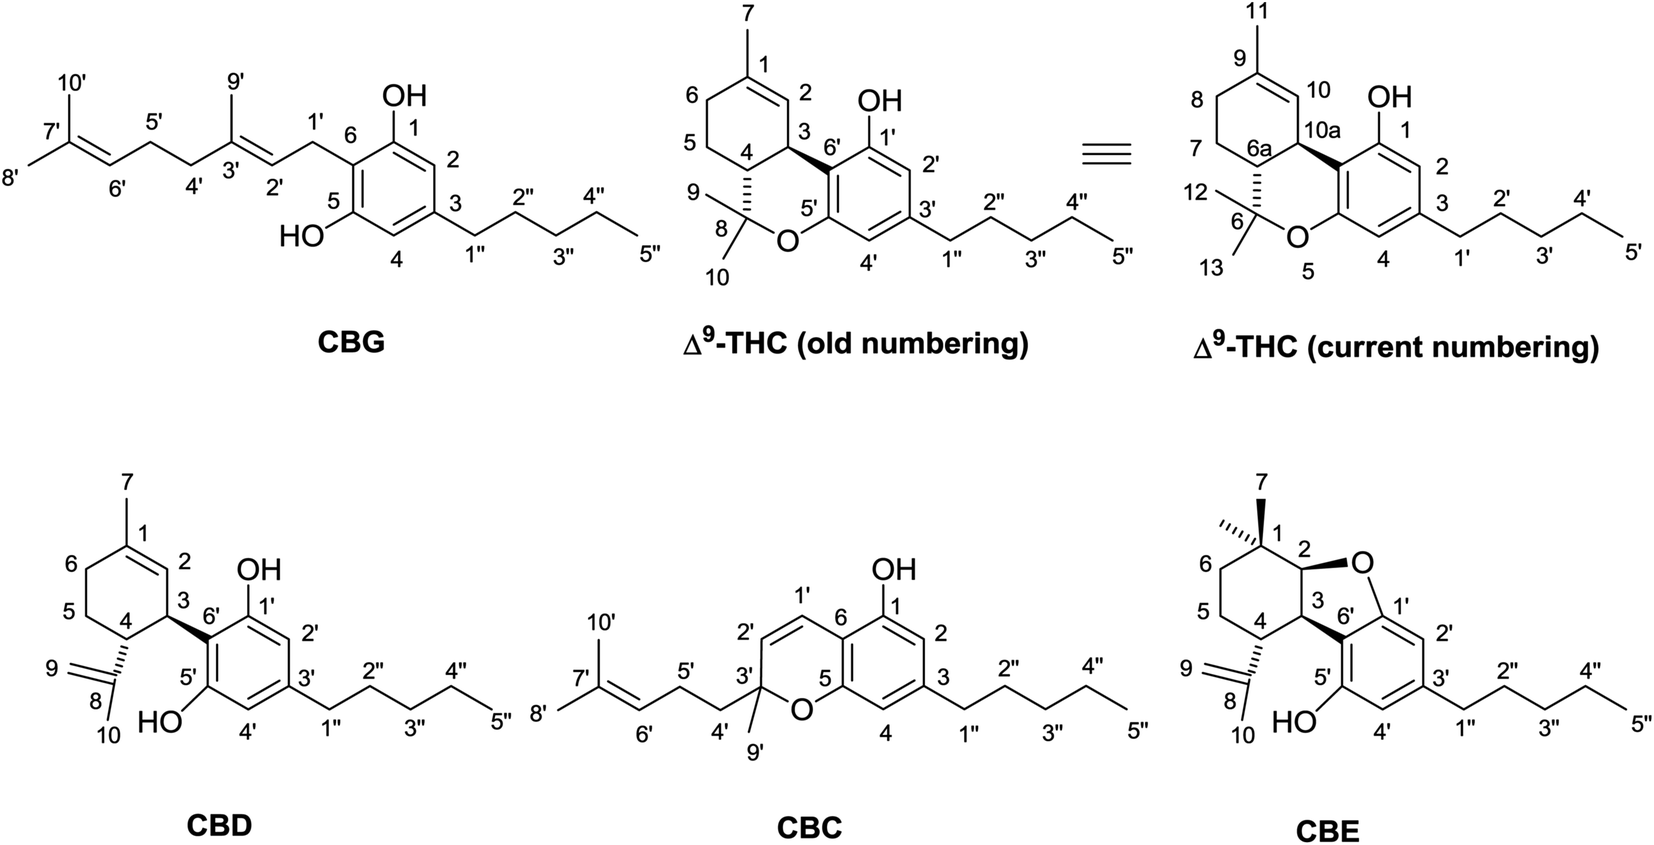 Phytocannabinoids: a unified critical inventory - Natural Product 